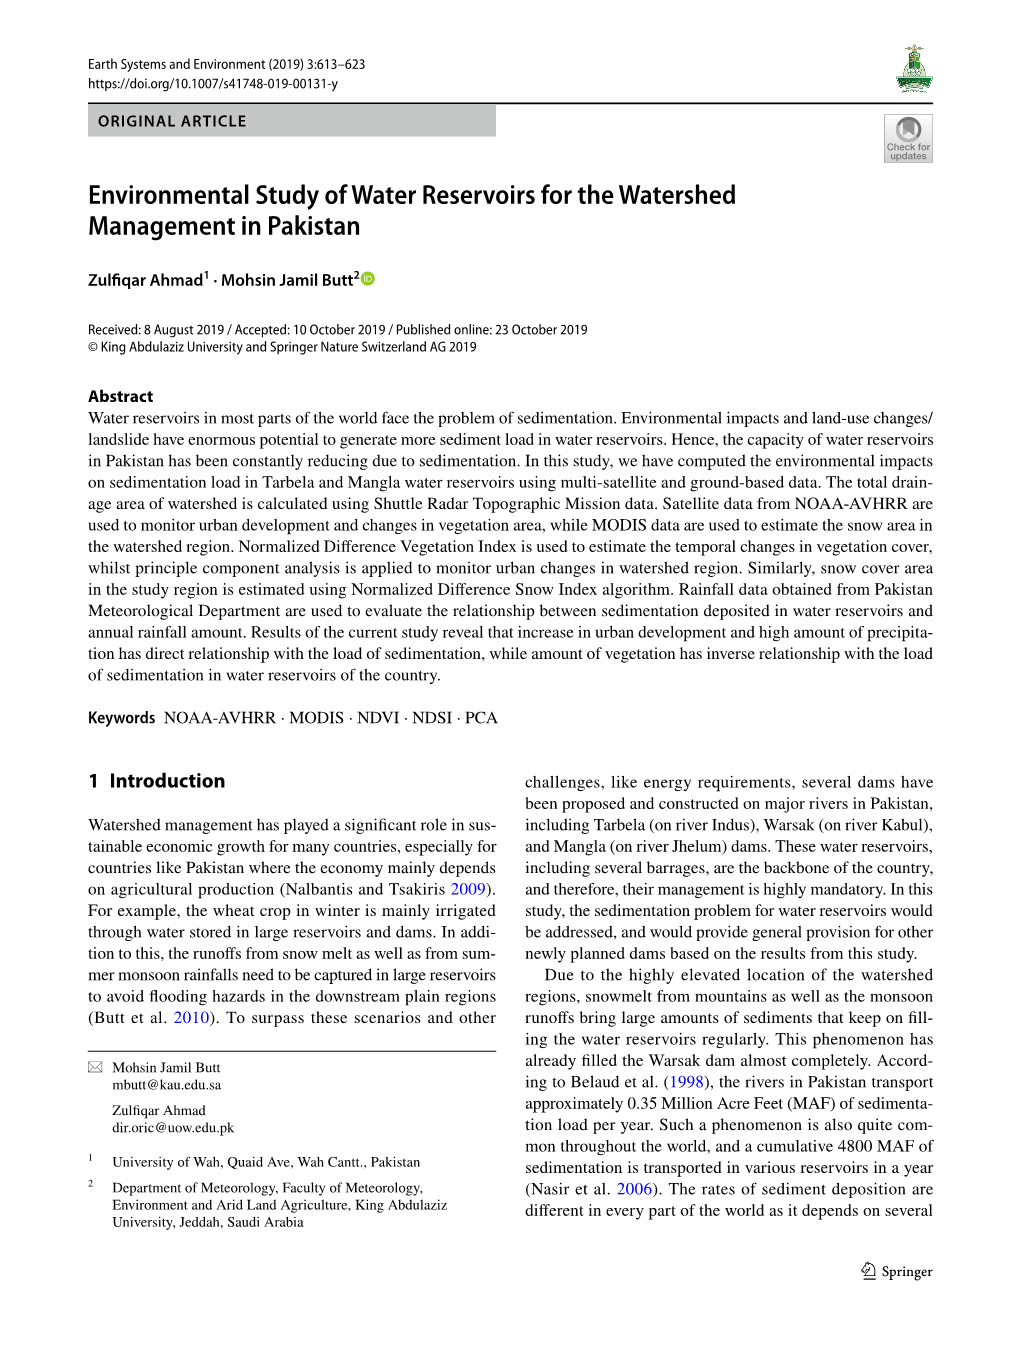 Environmental Study of Water Reservoirs for the Watershed Management in Pakistan